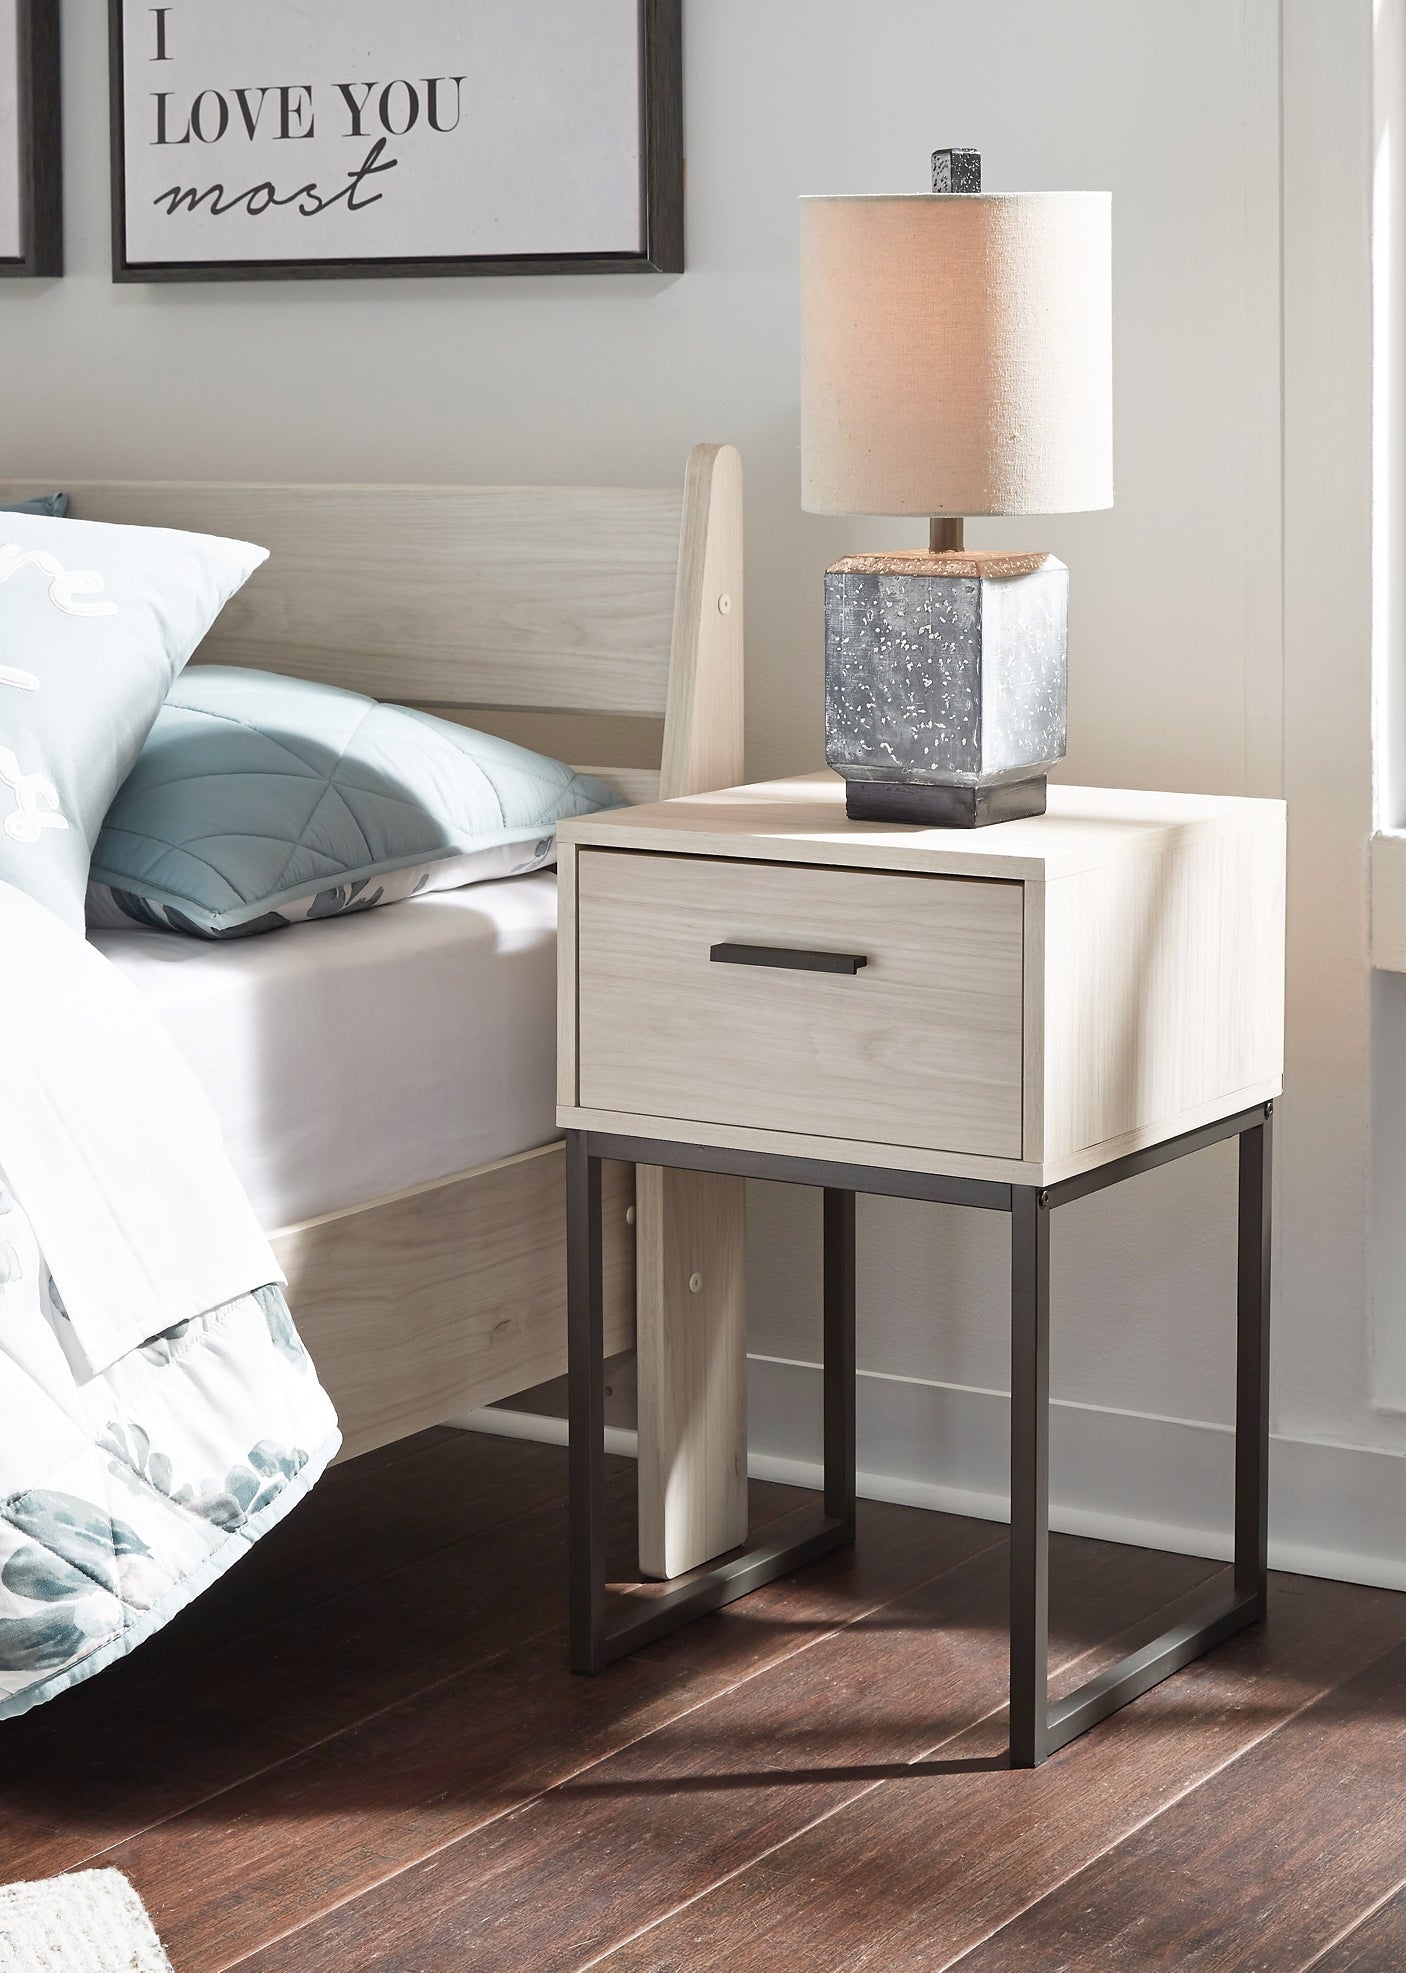 Night Stands: Enhance Your Bedroom with Stylish Night Stands